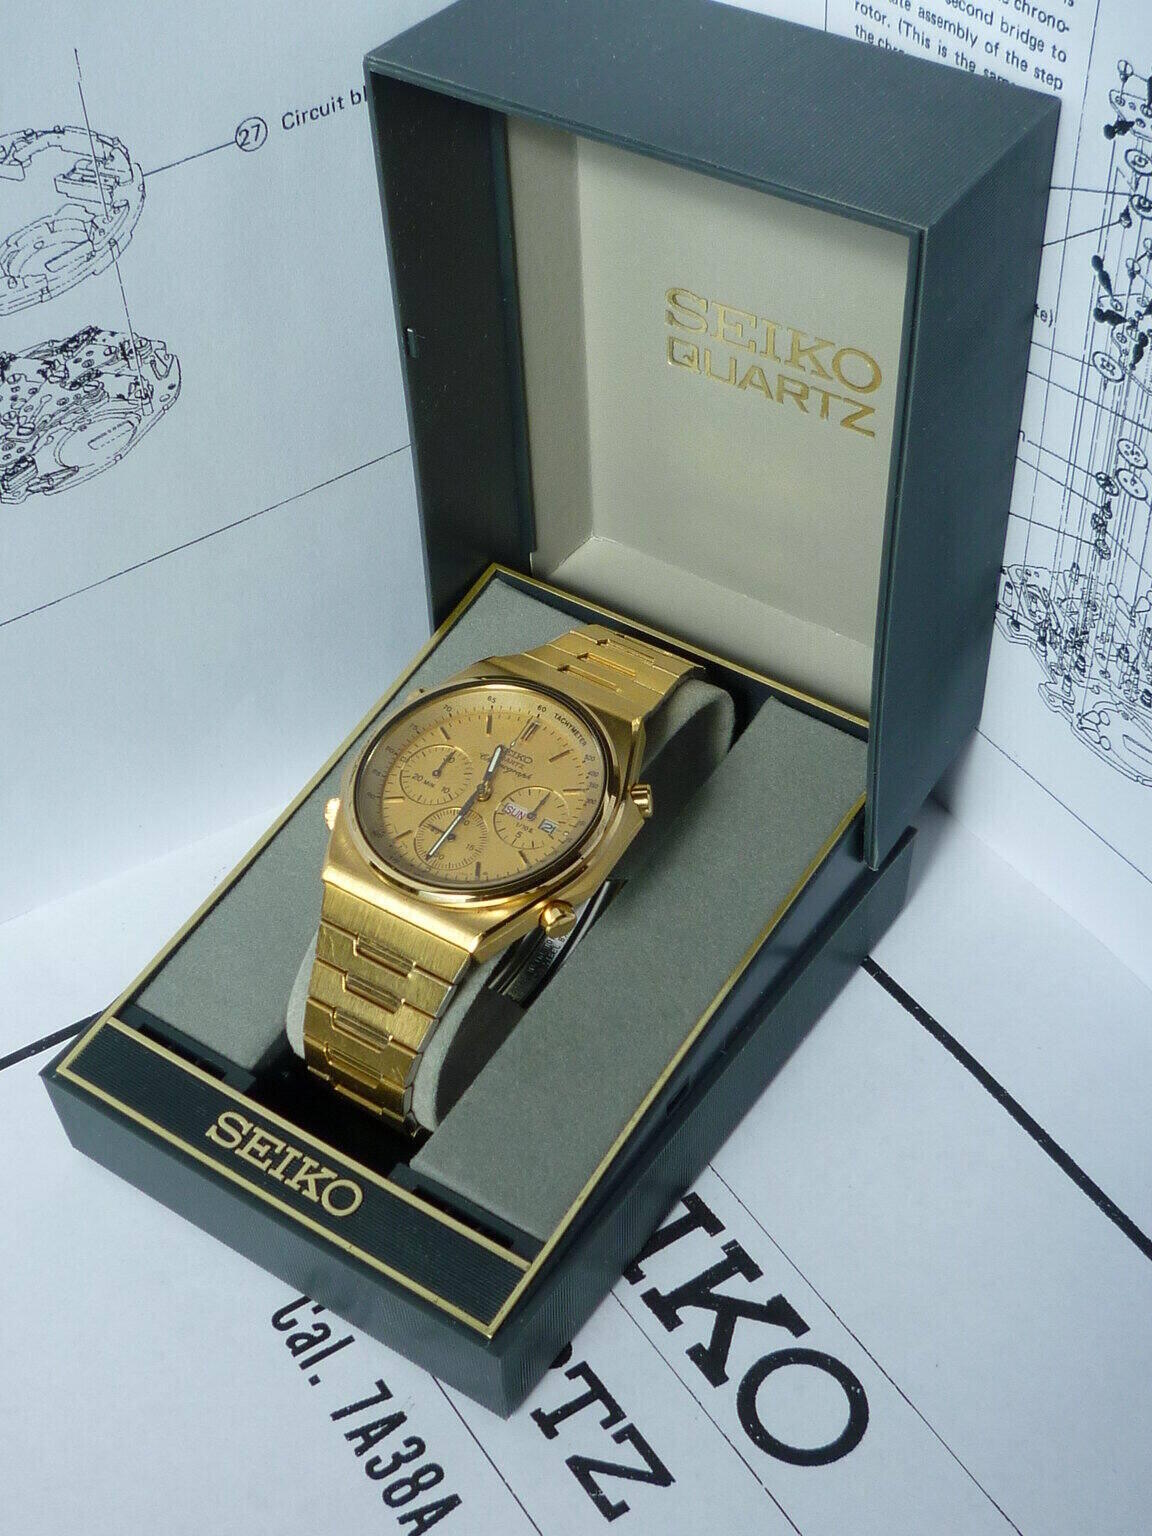 rsz_7a38-7000-gold-gold-sold-ebay-march2010-p1010457.jpg